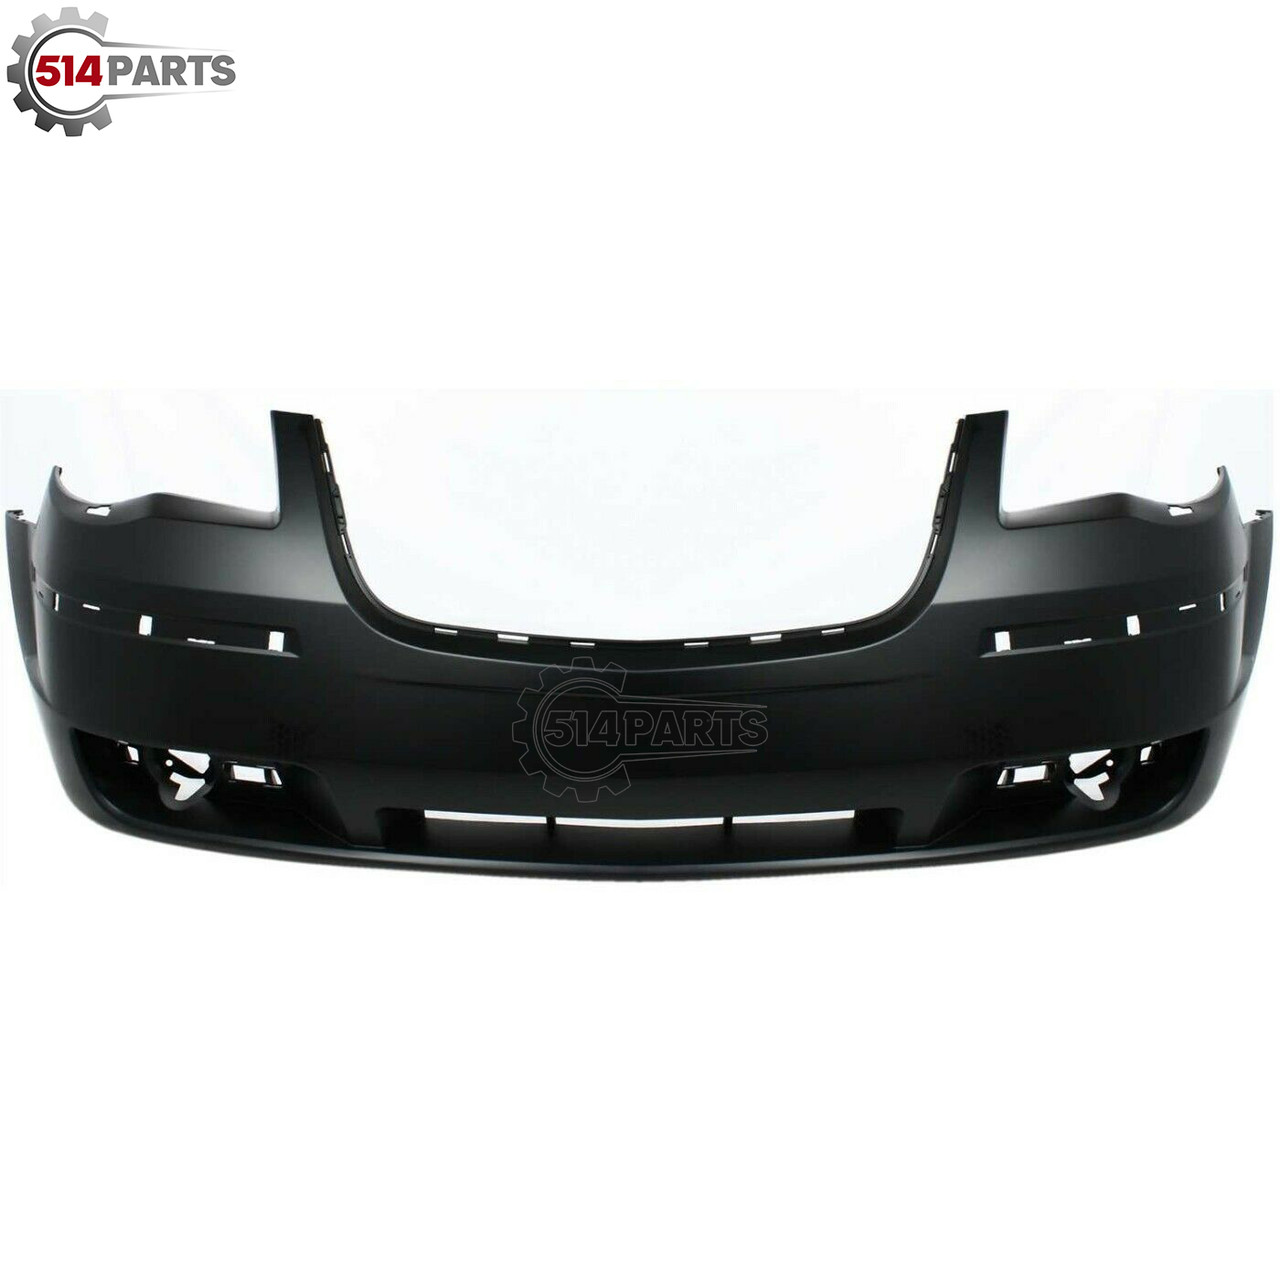 2008 - 2010 CHRYSLER TOWN and COUNTRY FRONT BUMPER COVER with HEADLIGHT WASHER and MOULDING HOLES - PARE-CHOCS AVANT avec LAVE-PHARE et TROUS DE MOULAGE